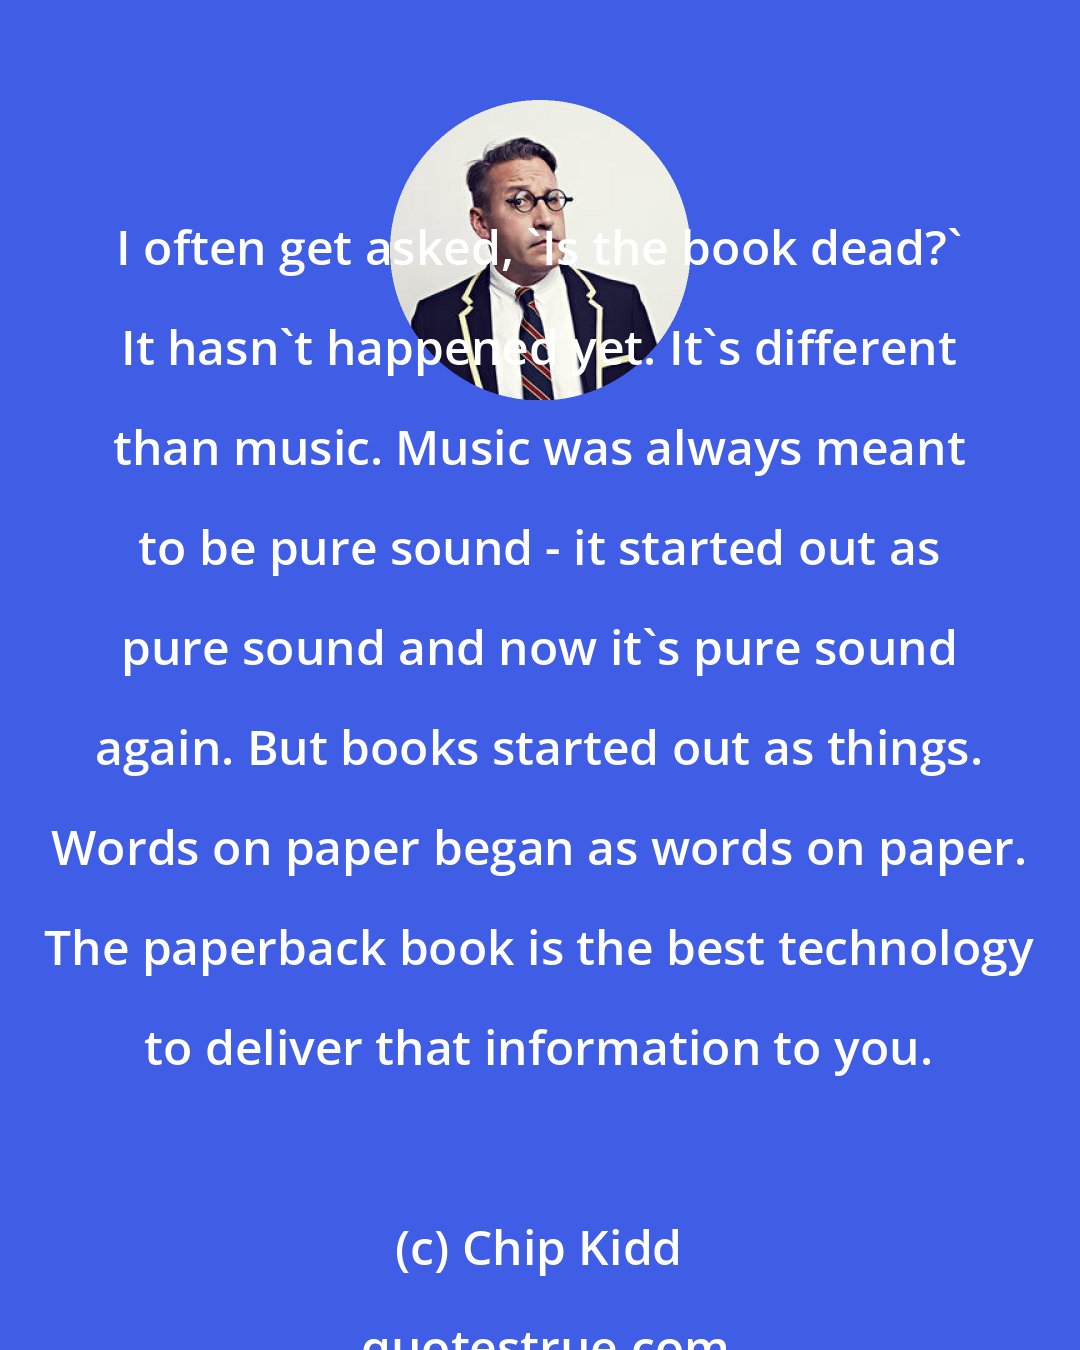 Chip Kidd: I often get asked, 'Is the book dead?' It hasn't happened yet. It's different than music. Music was always meant to be pure sound - it started out as pure sound and now it's pure sound again. But books started out as things. Words on paper began as words on paper. The paperback book is the best technology to deliver that information to you.